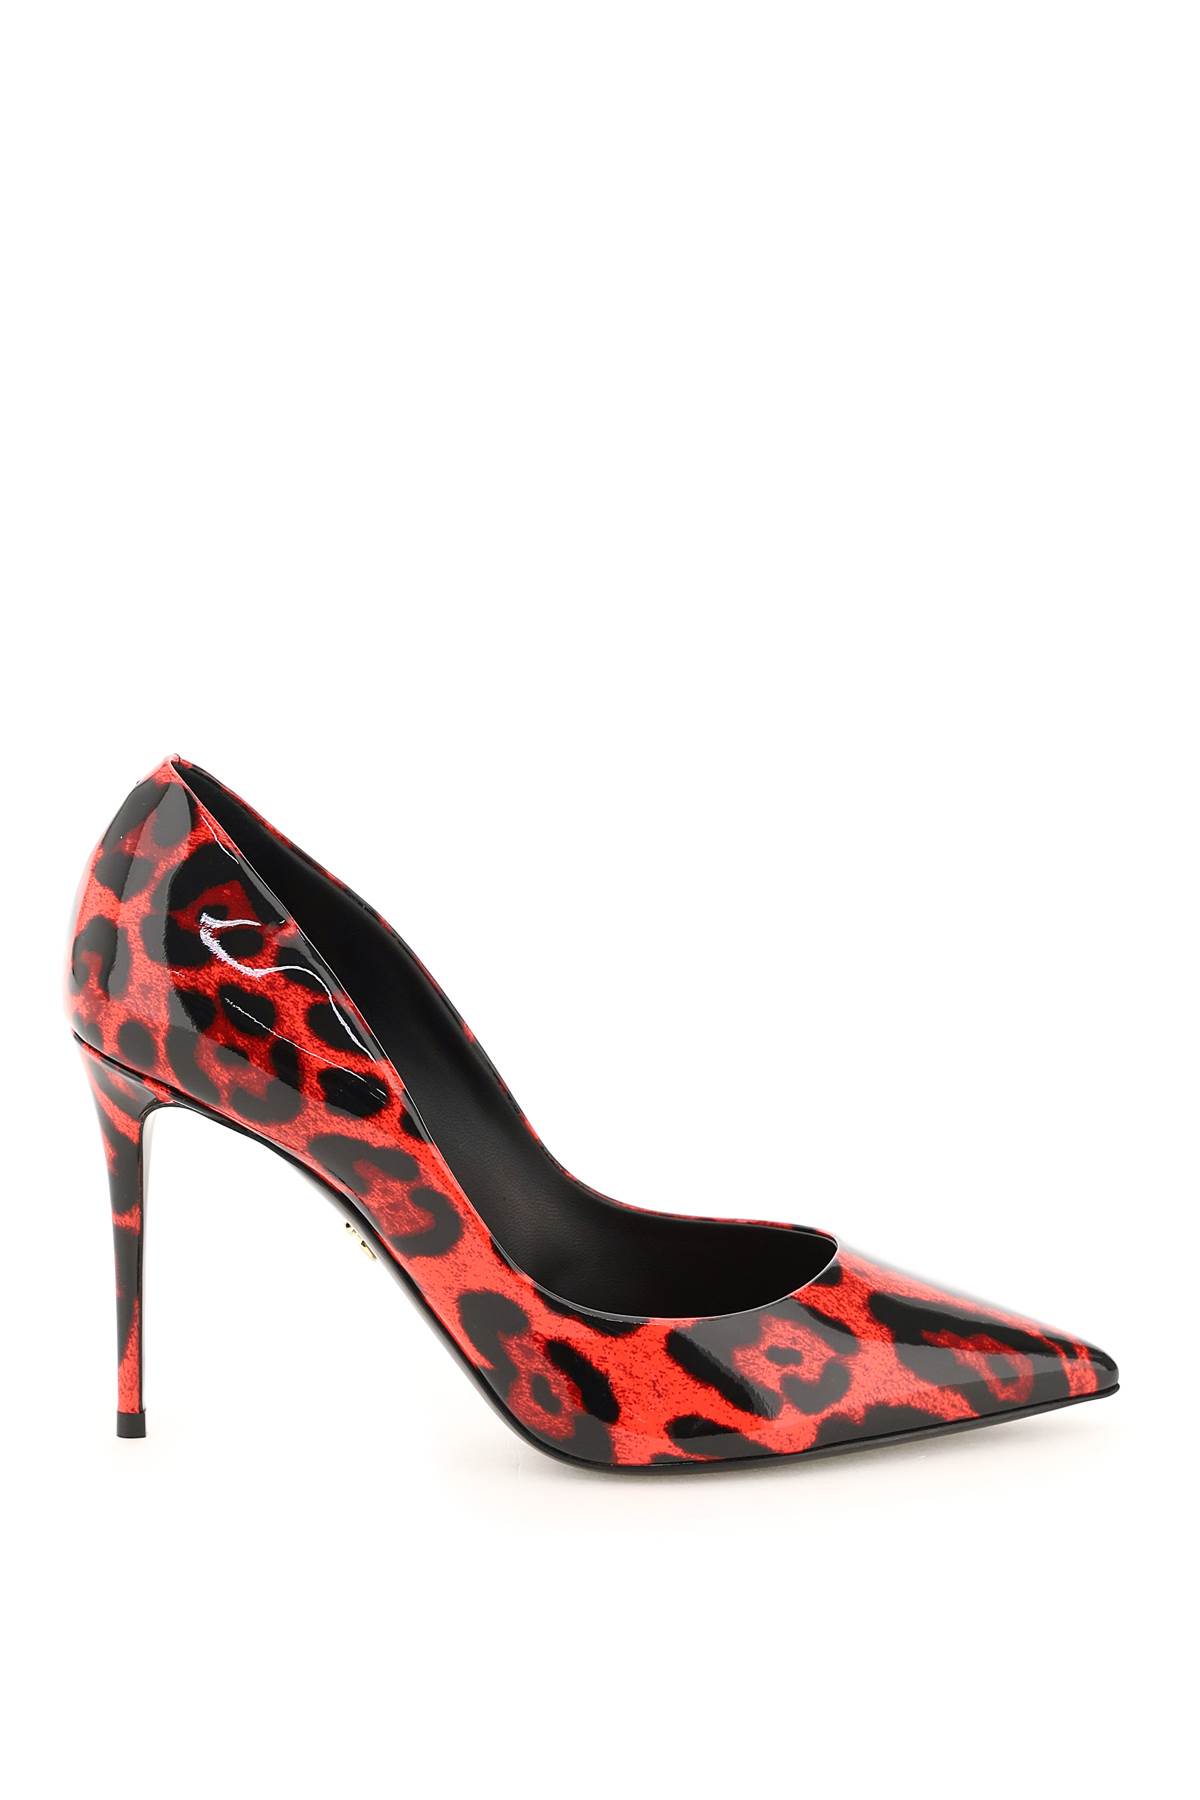 Dolce & Gabbana Printed Patent Leather Pumps